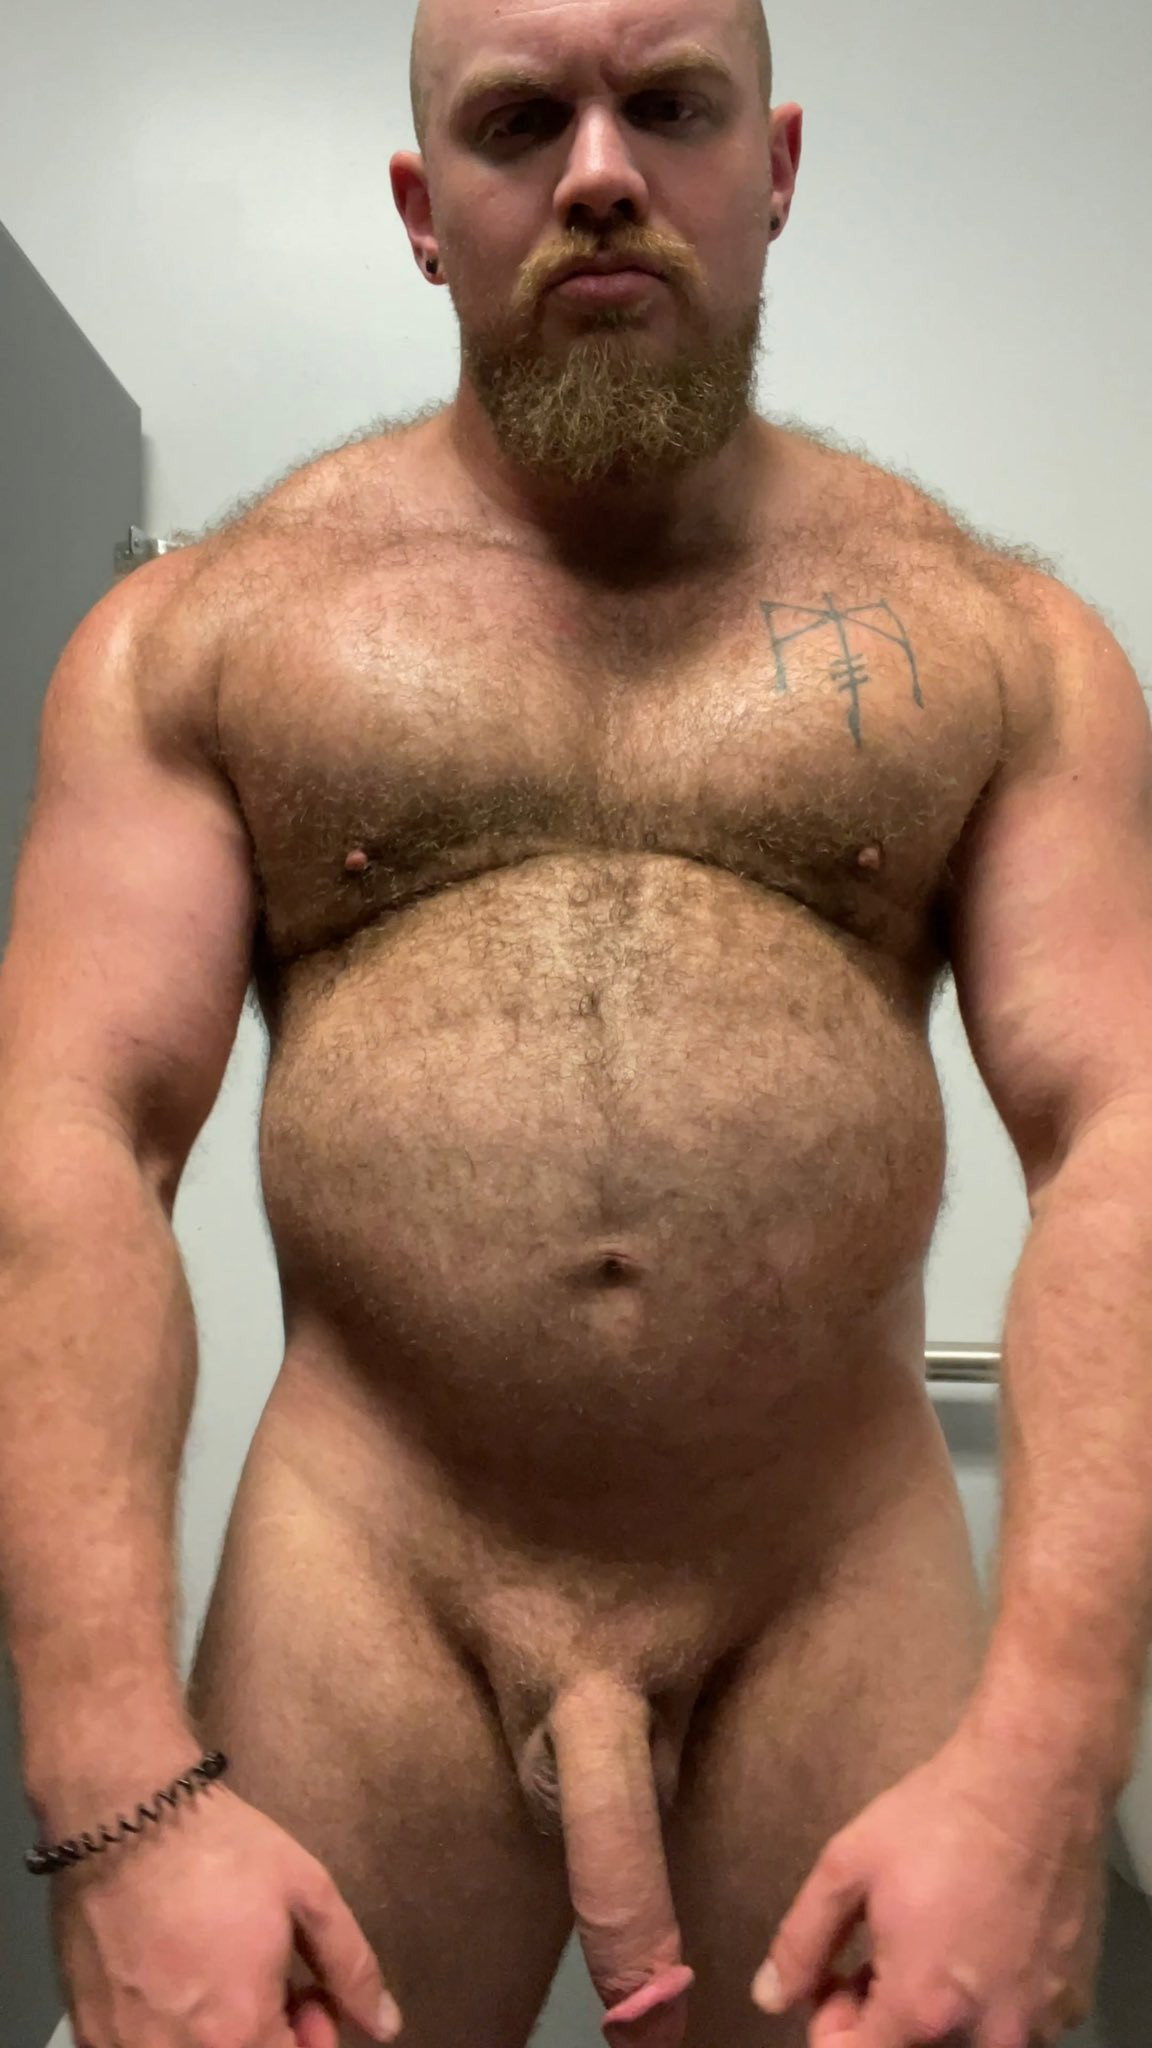 Photo by Ultra-Masculine-XXX with the username @Ultra-Masculine-XXX,  February 2, 2023 at 3:58 AM. The post is about the topic Gay Bears and the text says 'Ken a.k.a. GingerRilla #Ken #GingerRilla #hairy #muscle #bear #beard'